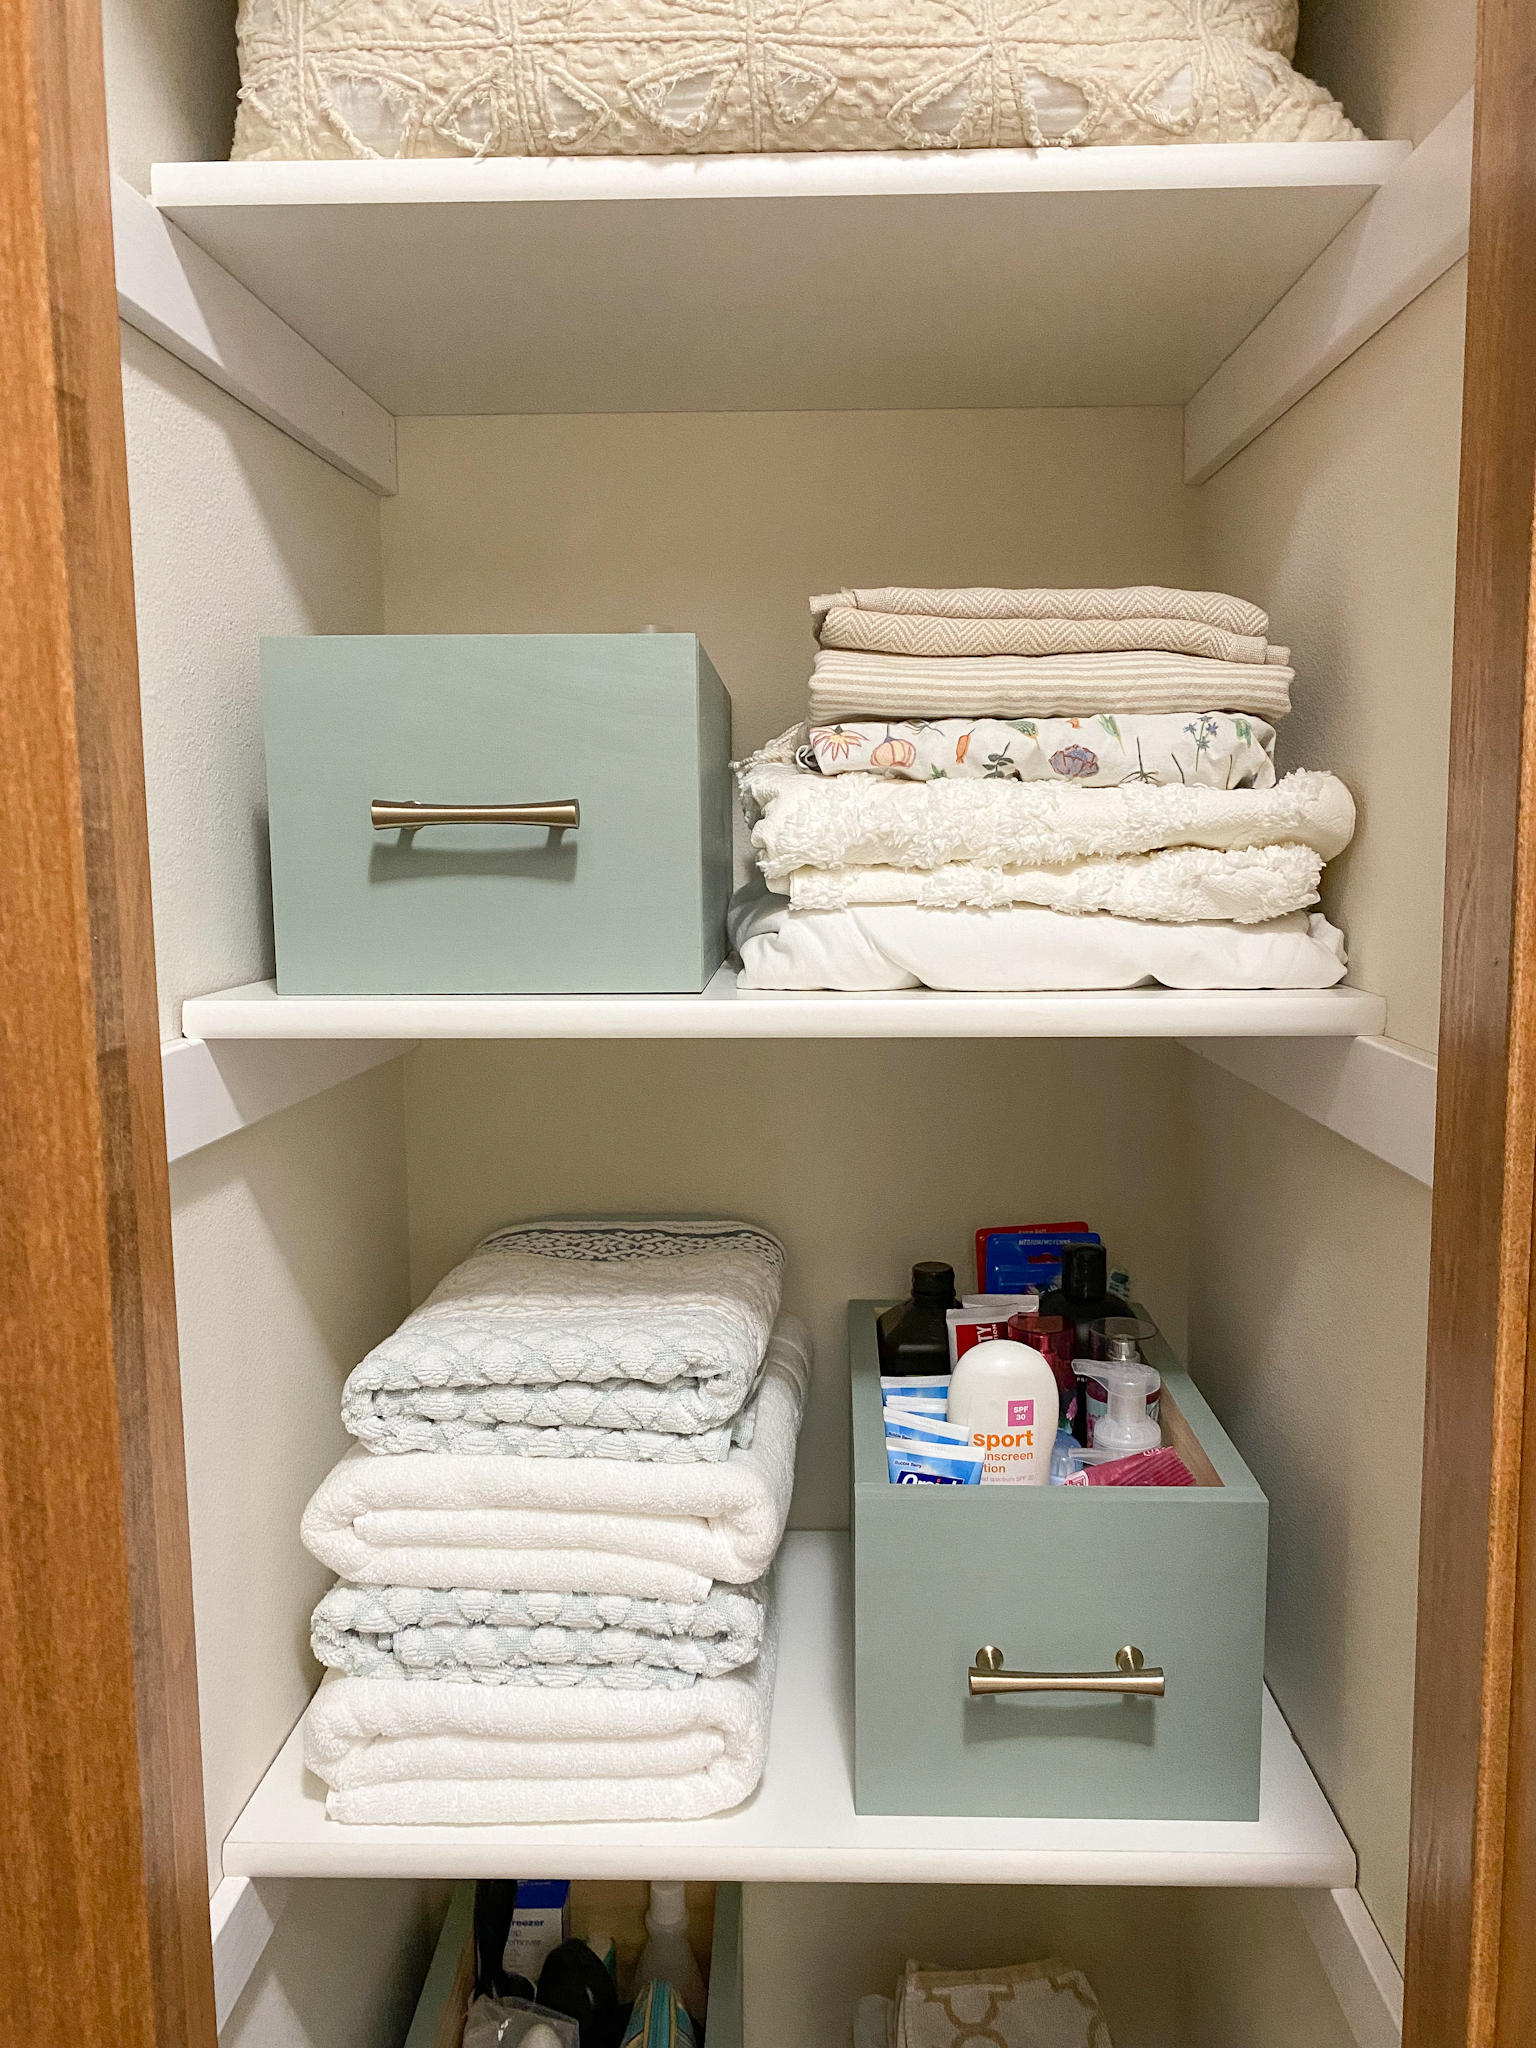 https://www.thehandcraftedhaven.com/wp-content/uploads/2022/03/Finished-Linen-Closet-Straight-View.jpg